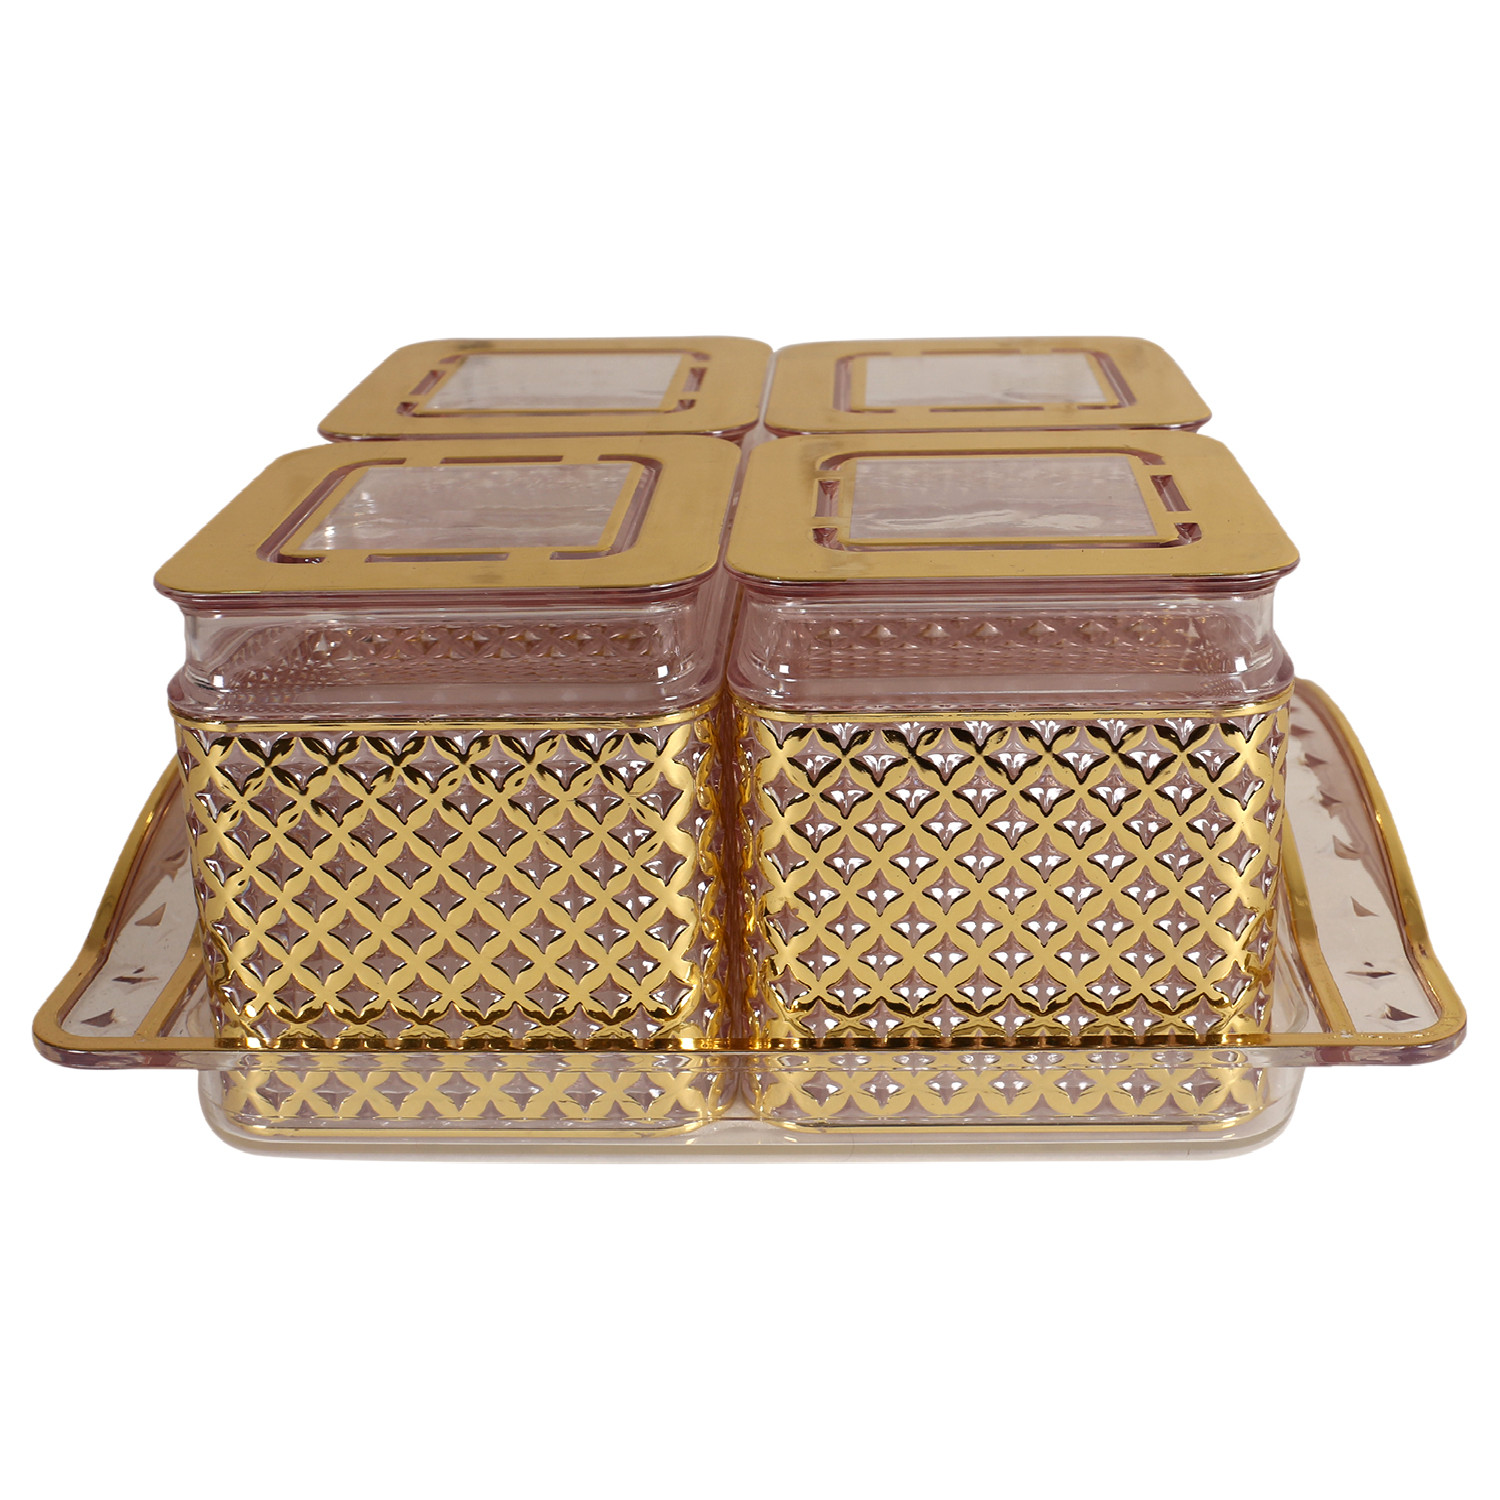 Kuber Industries 4 Containers & Tray Set|Unbreakable Gold Plated Plastic Snackers,Cookies,Nuts Serving Tray|Airtight Containers with Lid,400 ml (Gold)